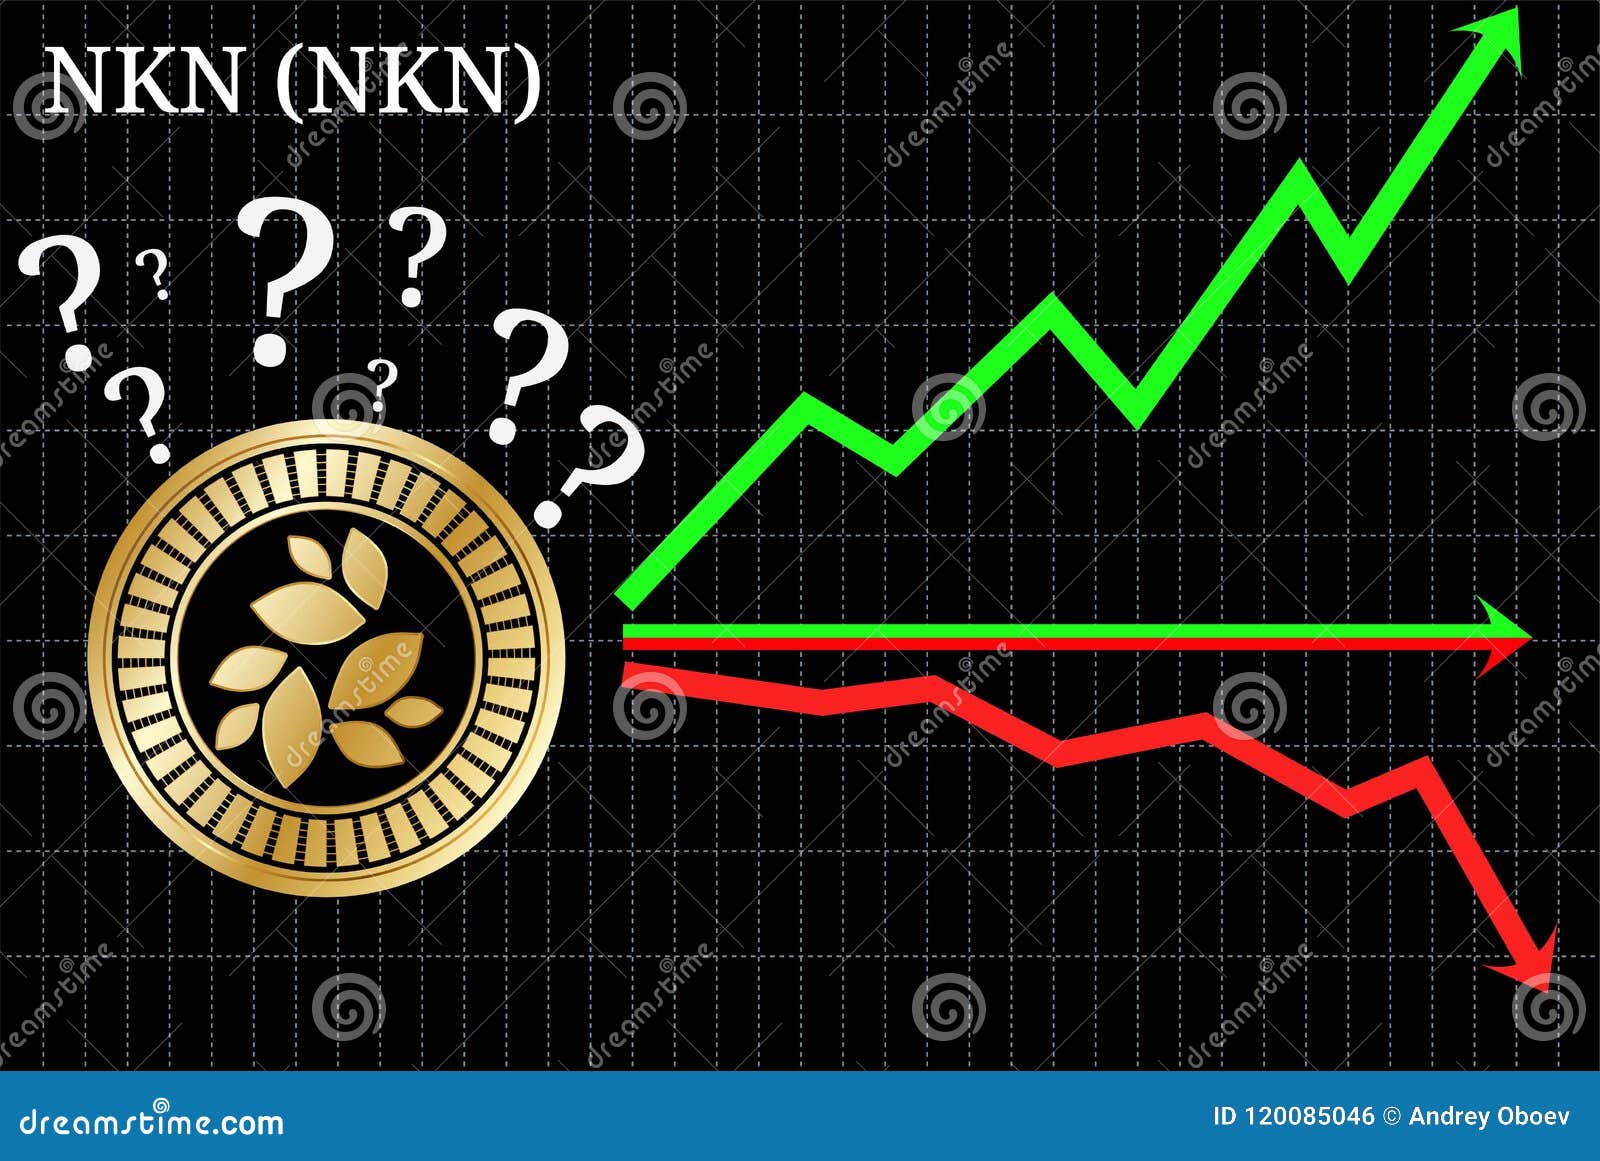 Possible Graphs Of Forecast NKN NKN Cryptocurrency - Up ...